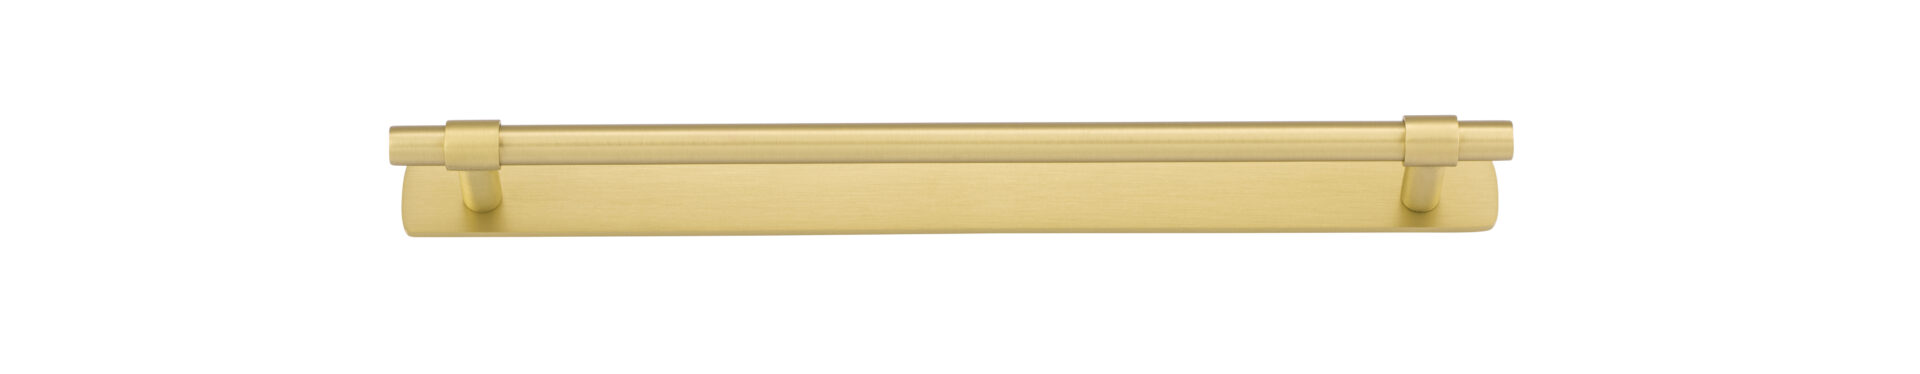 17154B - Helsinki Cabinet Pull with Backplate- CTC256mm - Brushed Gold PVD